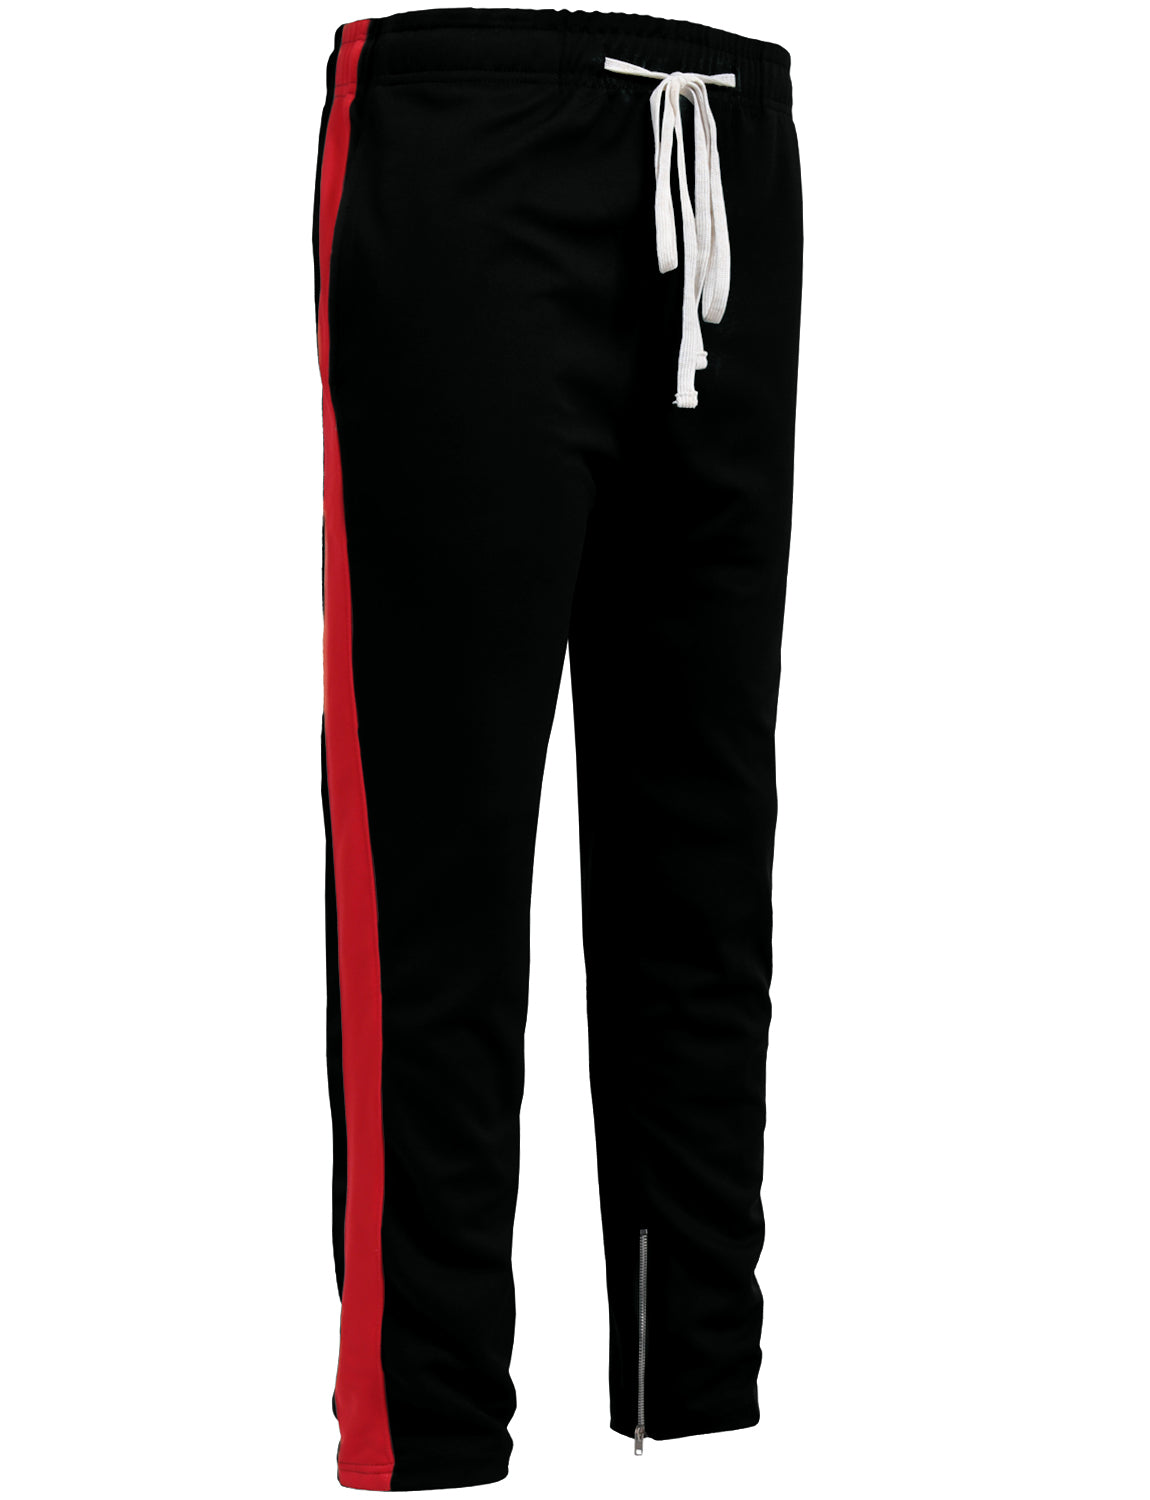 Blank for Printing Ankle Zipper Jogging Pants Nylon Track Pants Track Pants  Men - China Men's Trousers and Clothing price | Made-in-China.com